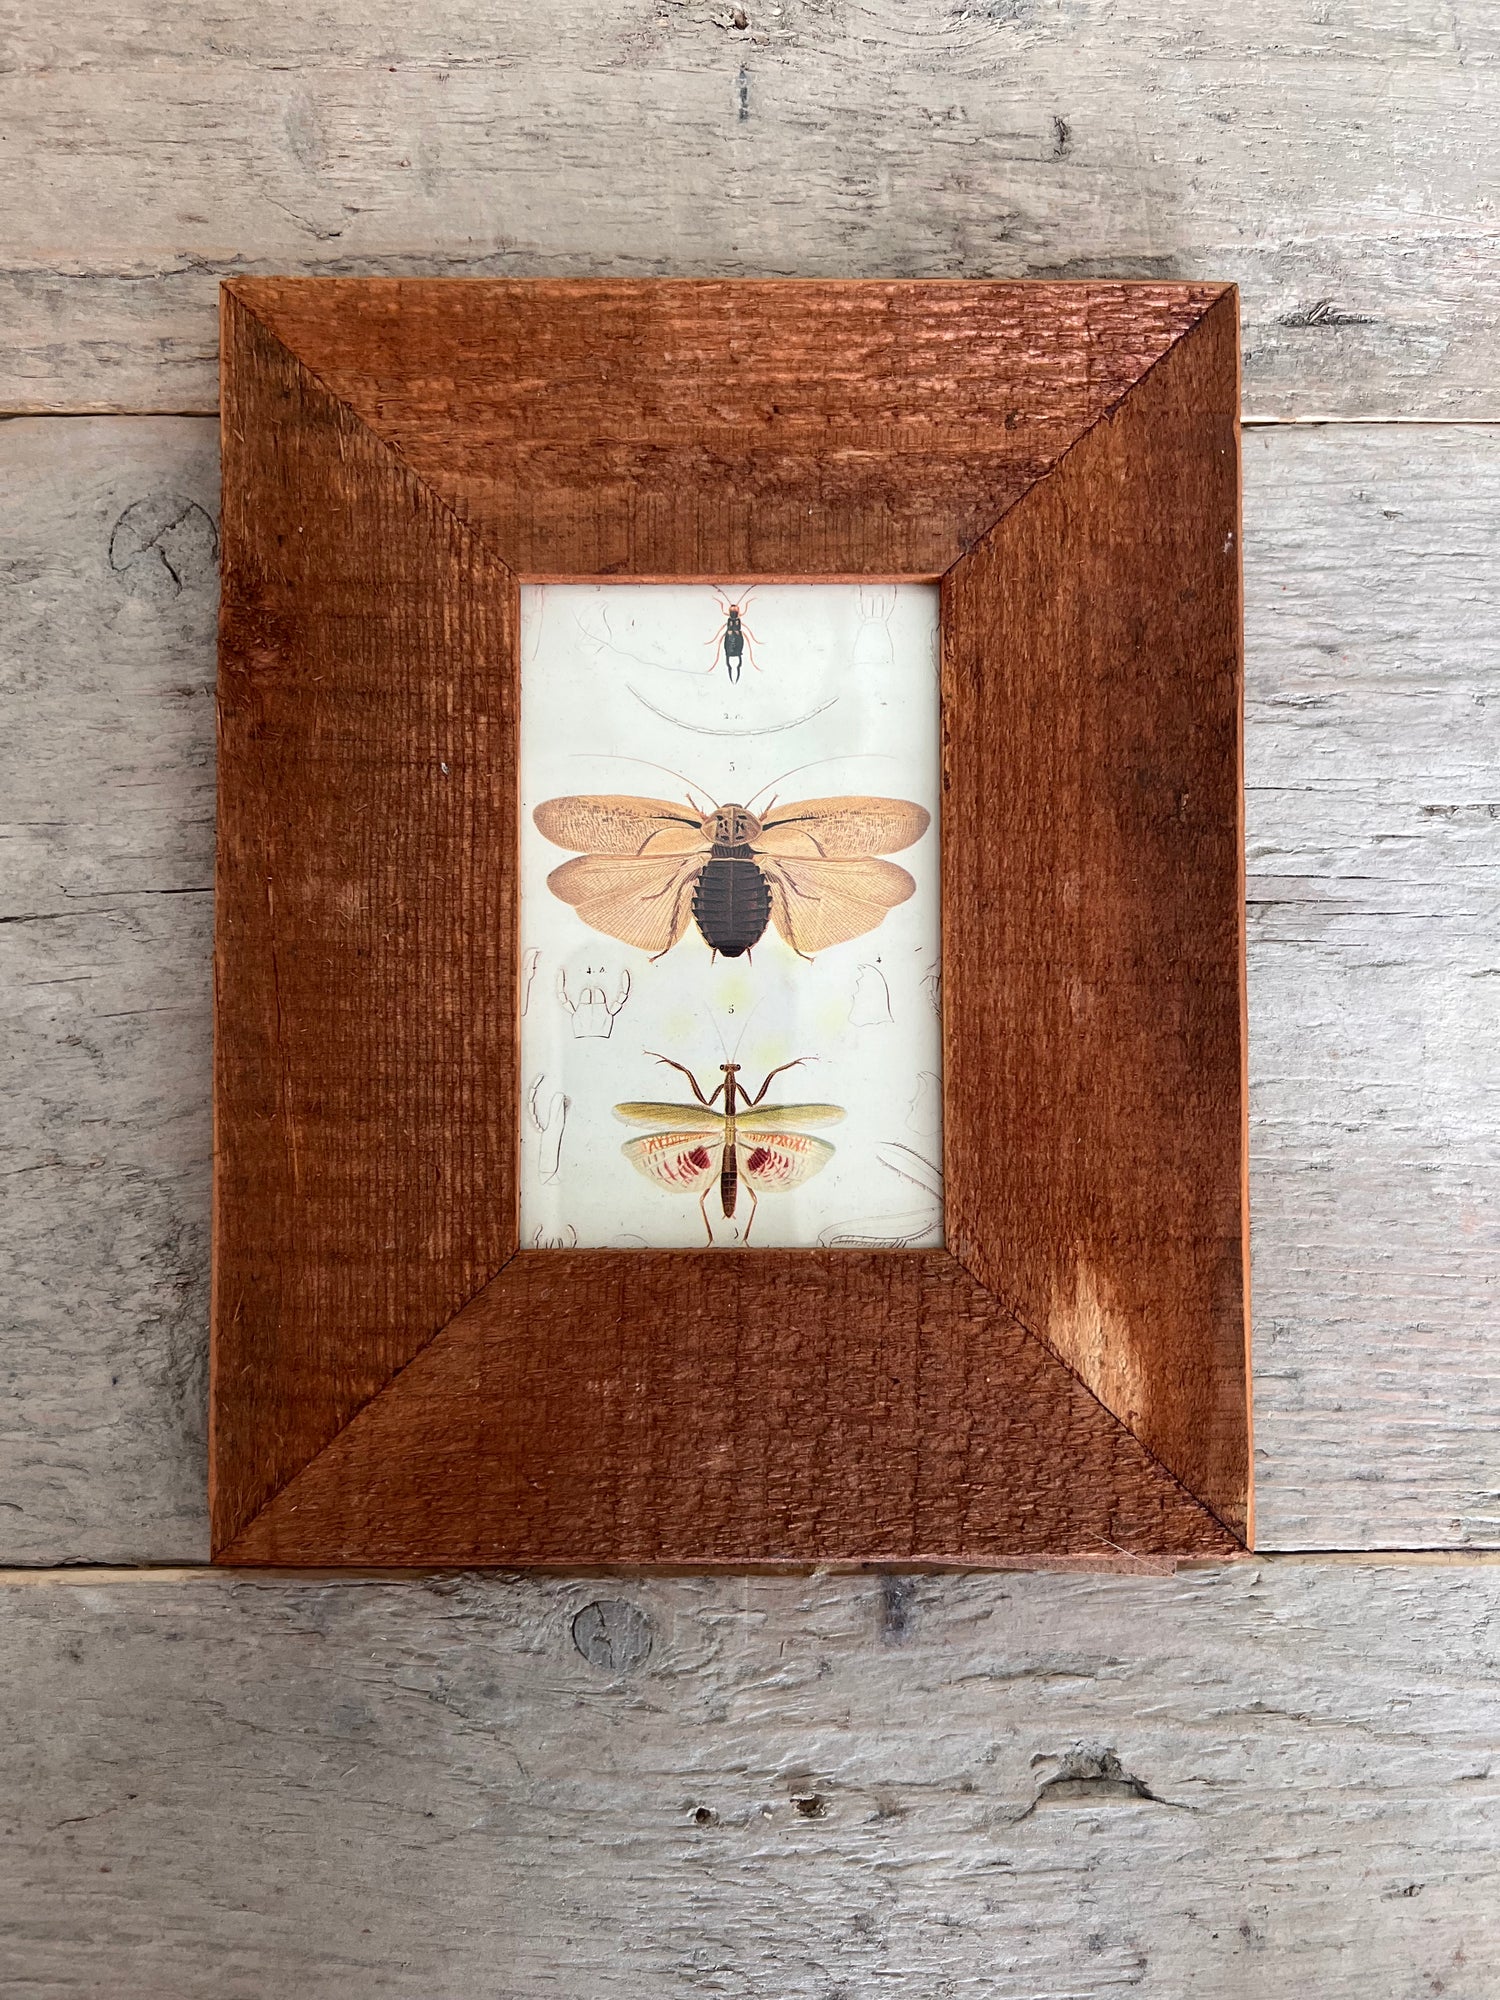 Wooden frame with insect illustration